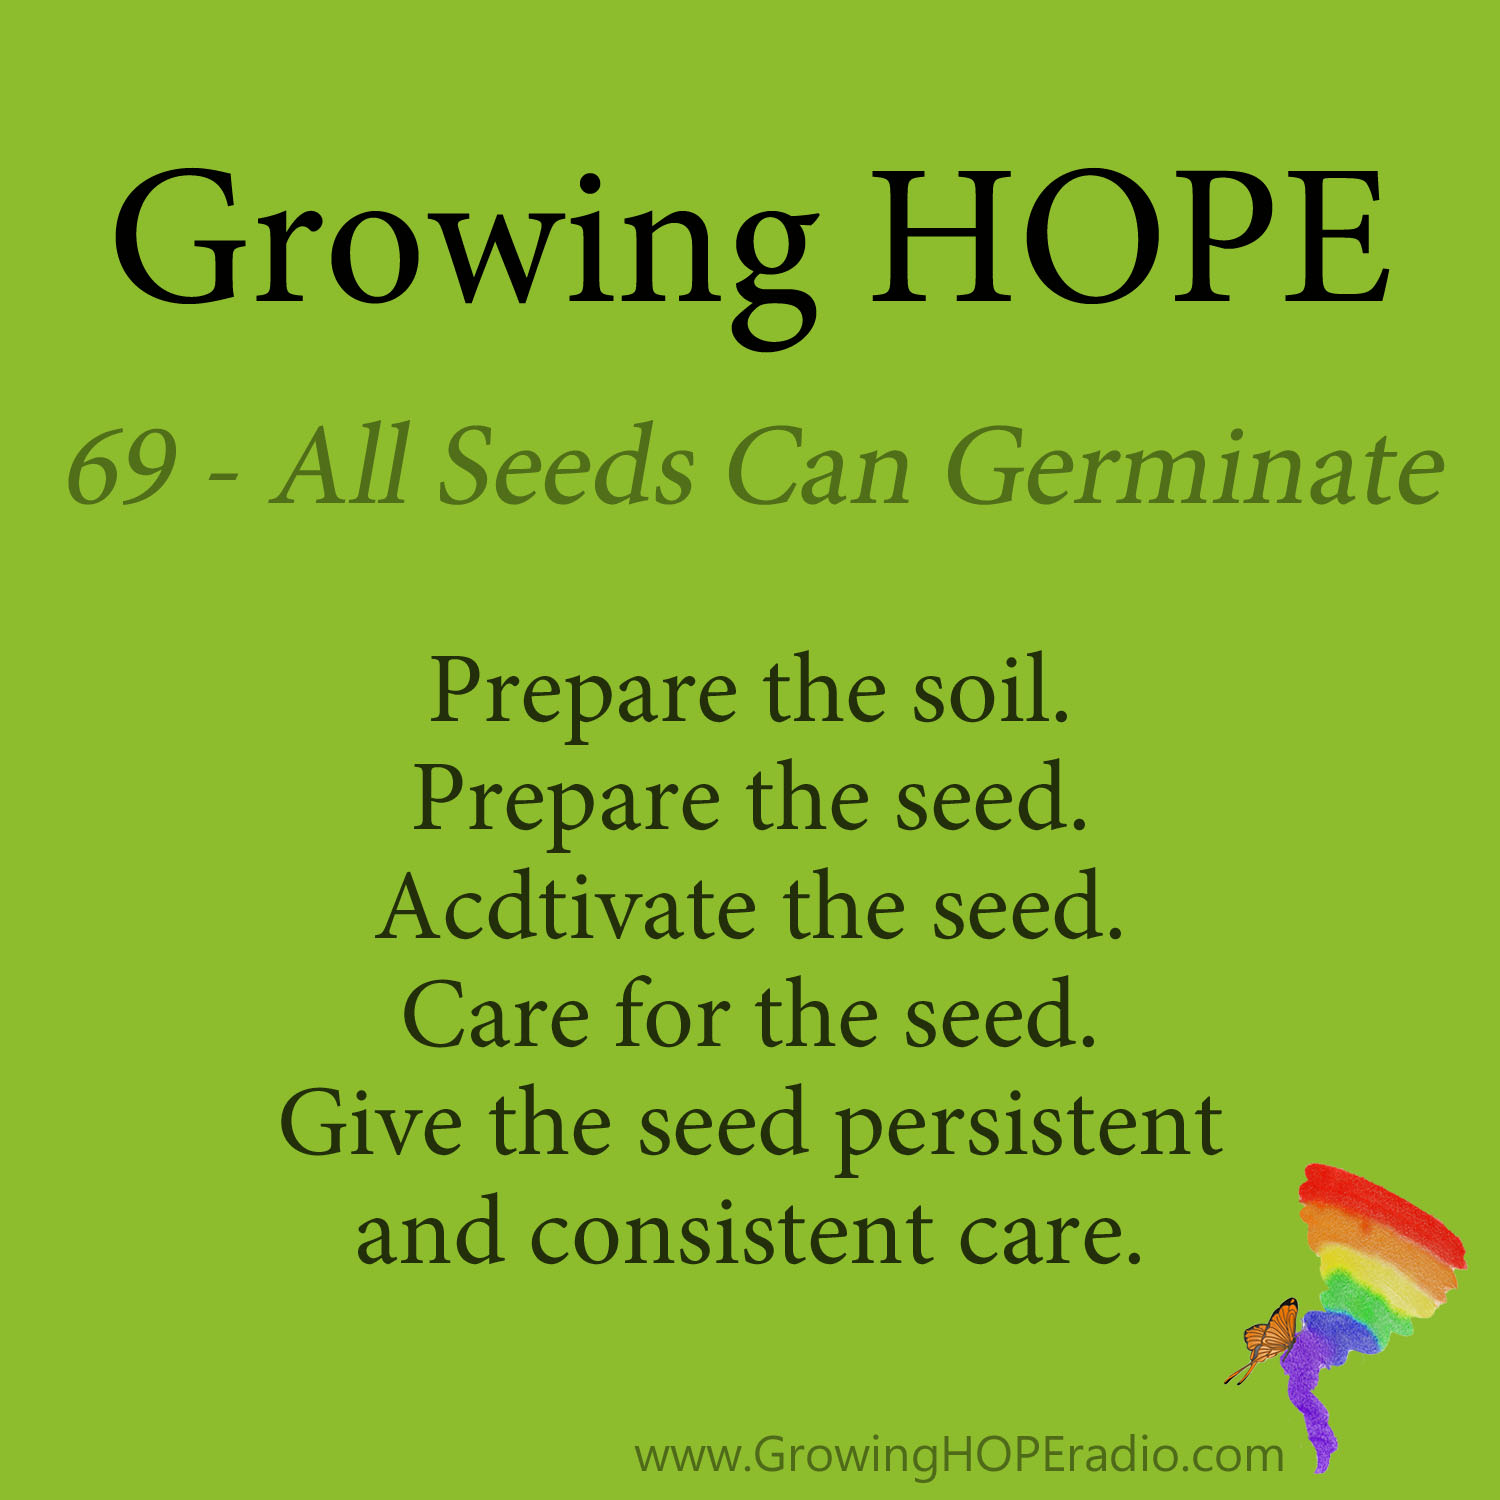 Growing HOPE Daily - 5 Points - 69 - All Seeds Can Germinate